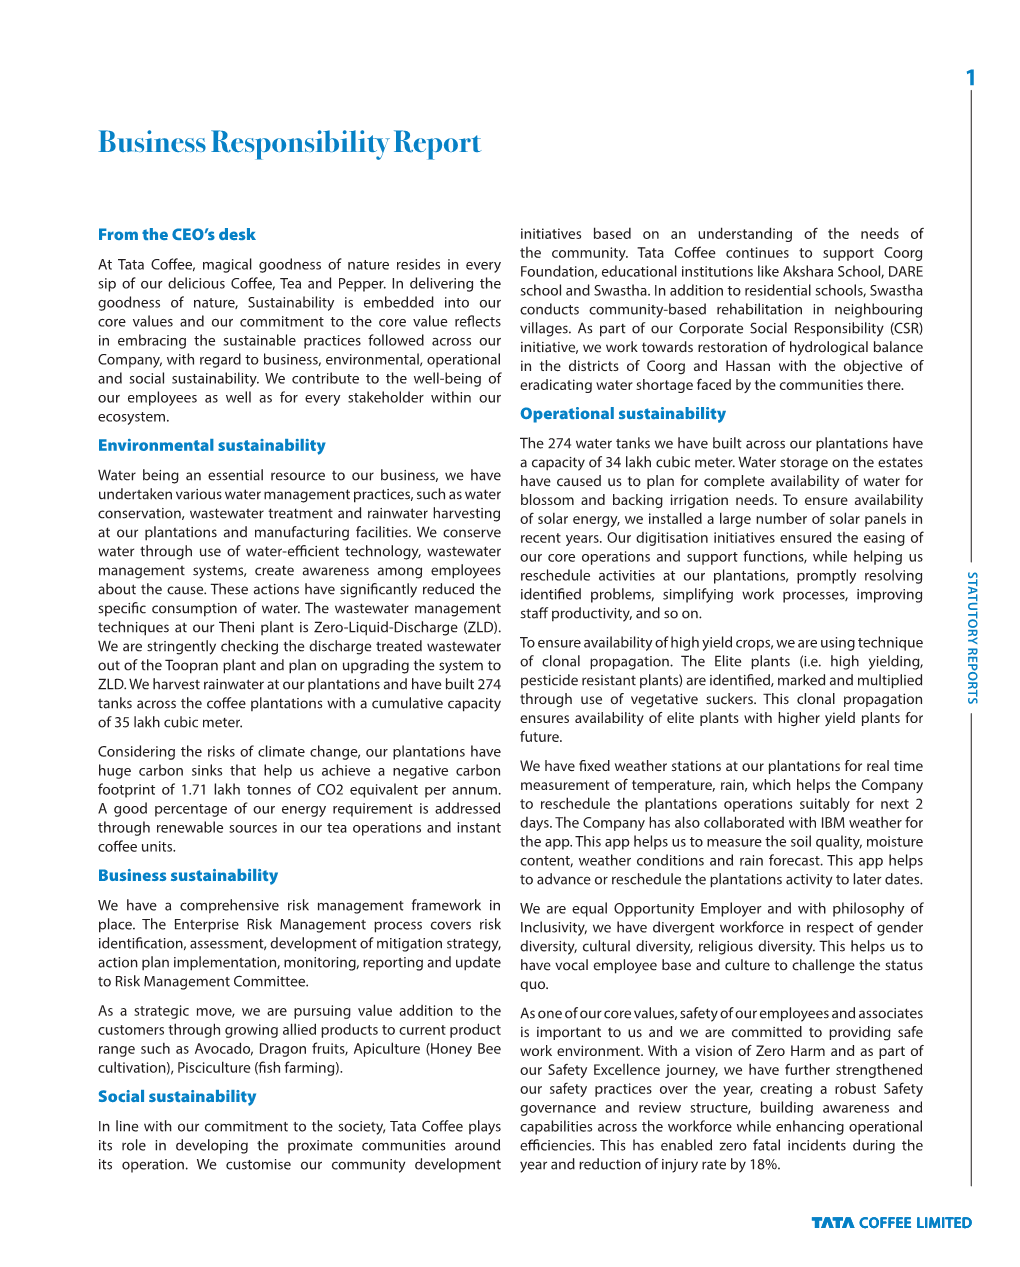 Business Responsibility Report